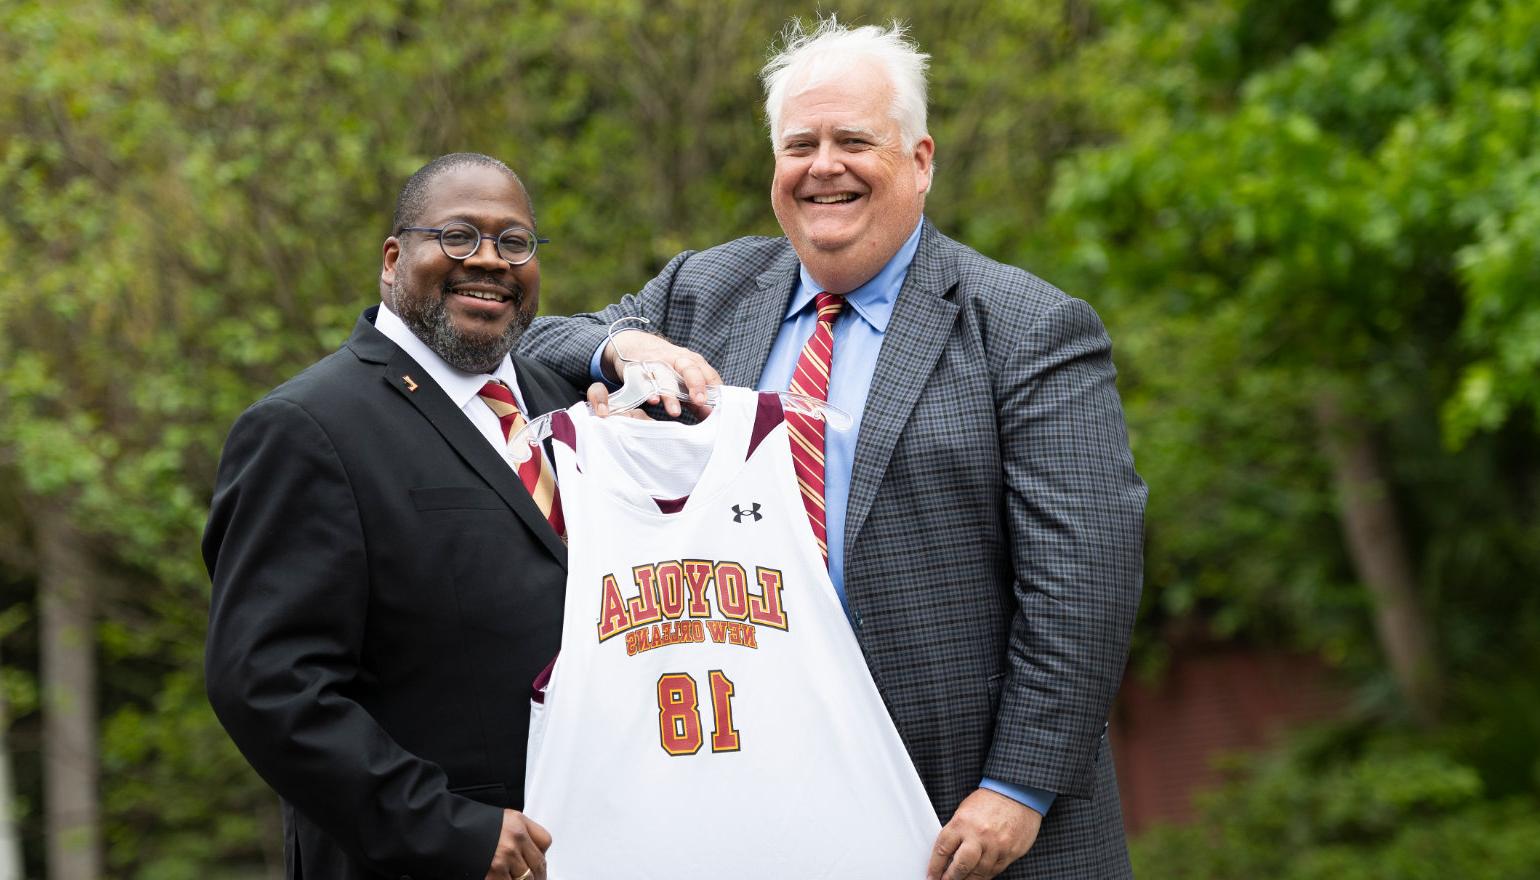 Stephen Landry '83, chair of the Board of Trustees, presents Dr. Xavier Cole with a #18 basketball jersey